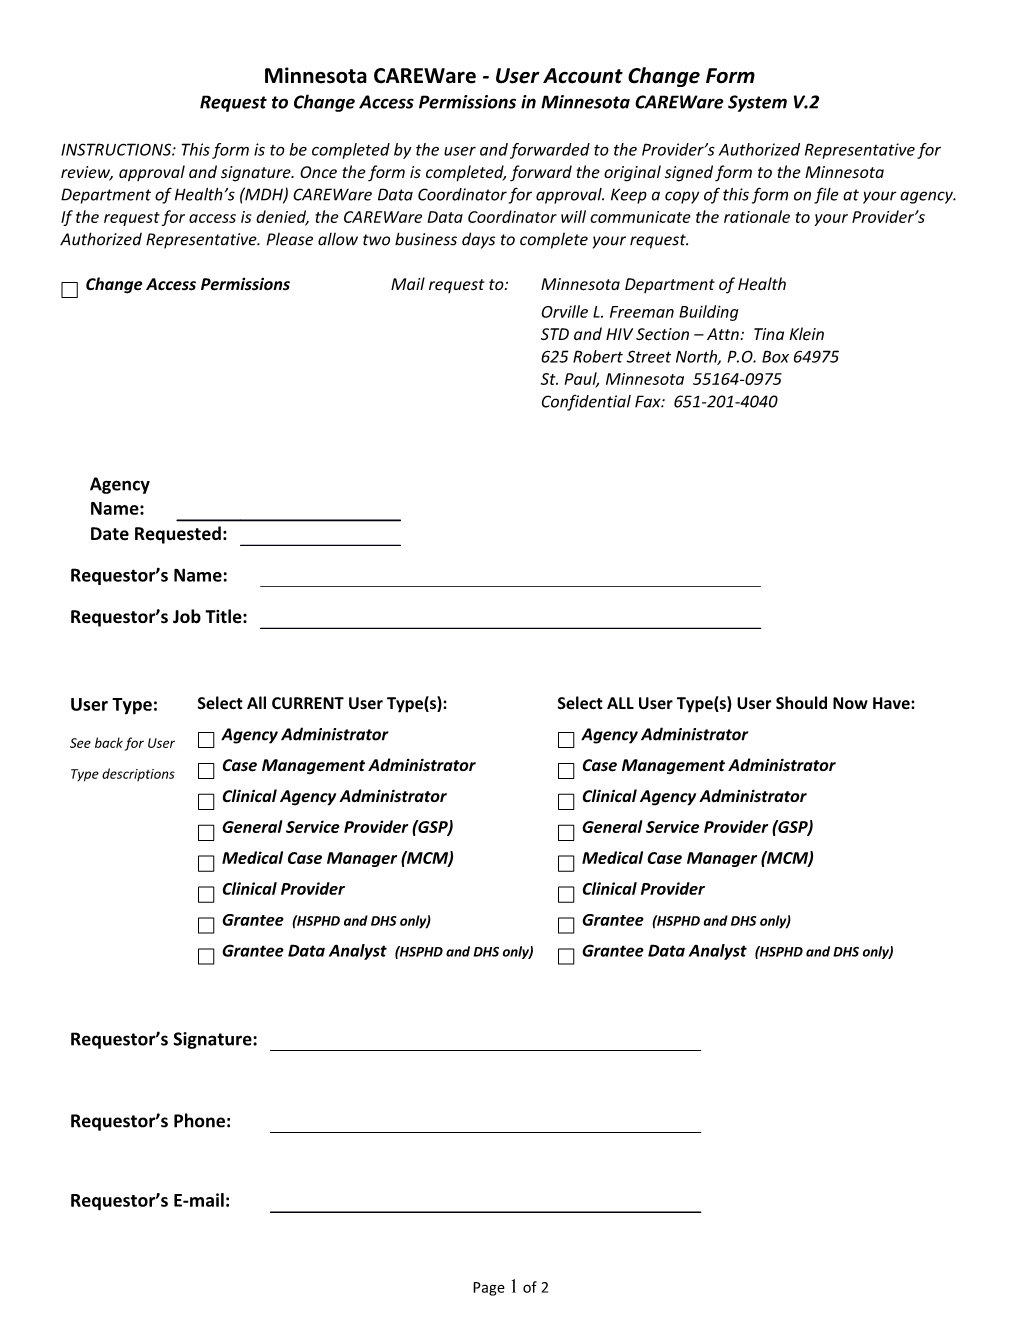 INSTRUCTIONS: This Form Is to Be Completed by the User S Supervisor and Forwarded to The